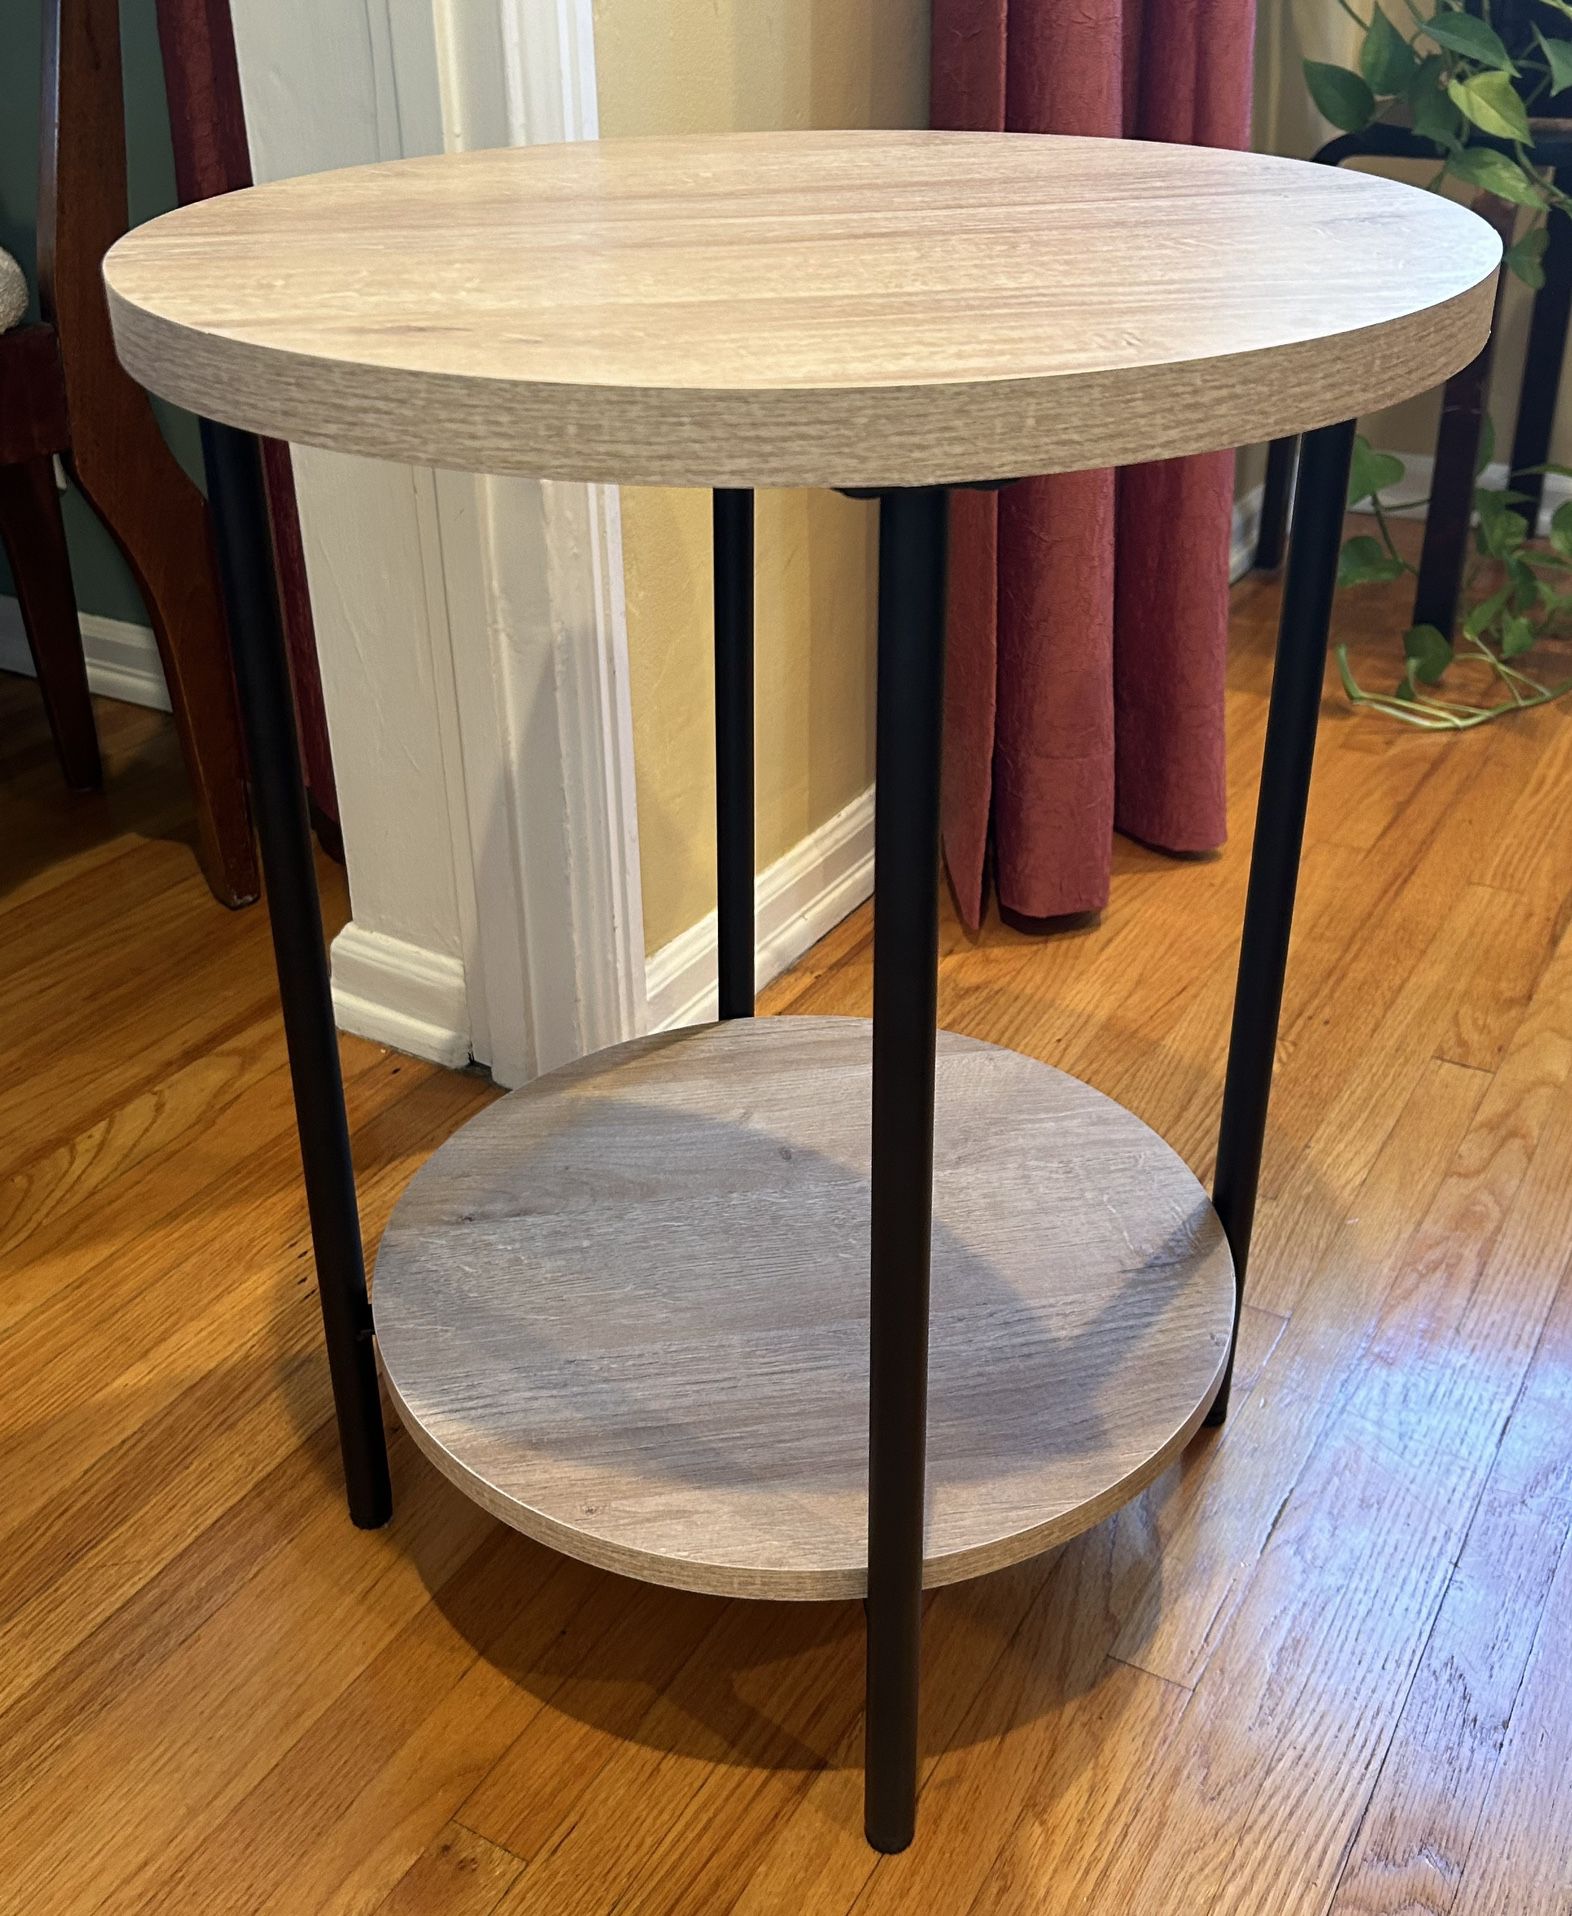 New Contemporary End Table or Nightstand (Burbank)